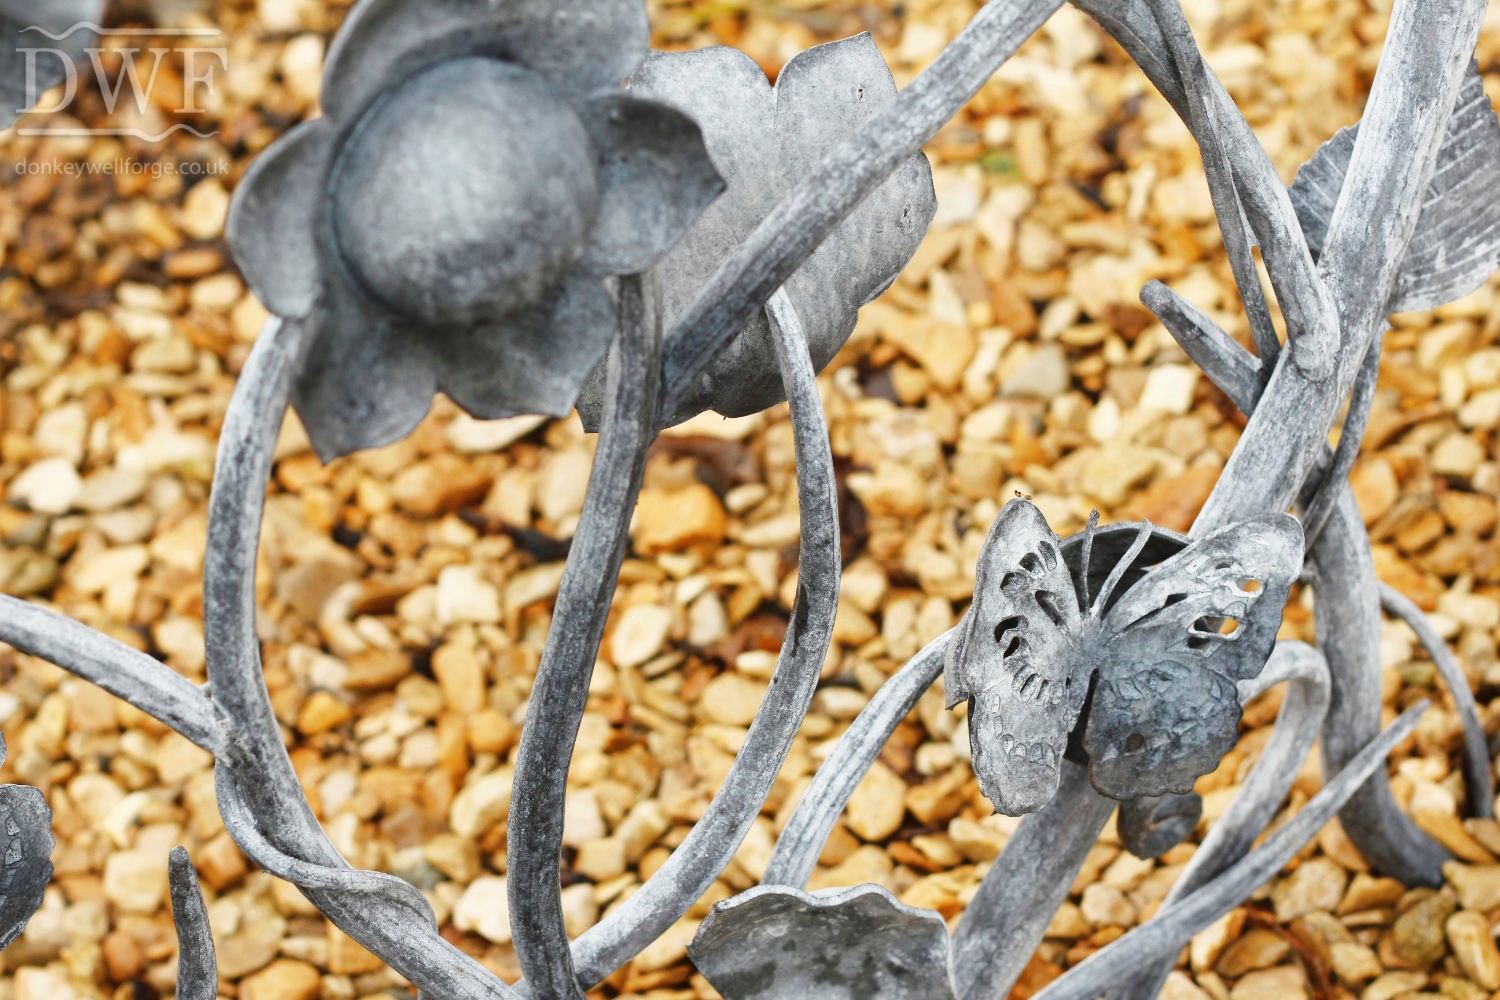 forged-artistic-floral-railings-gate-ironwork-patinated-donkeywell-forge-detail